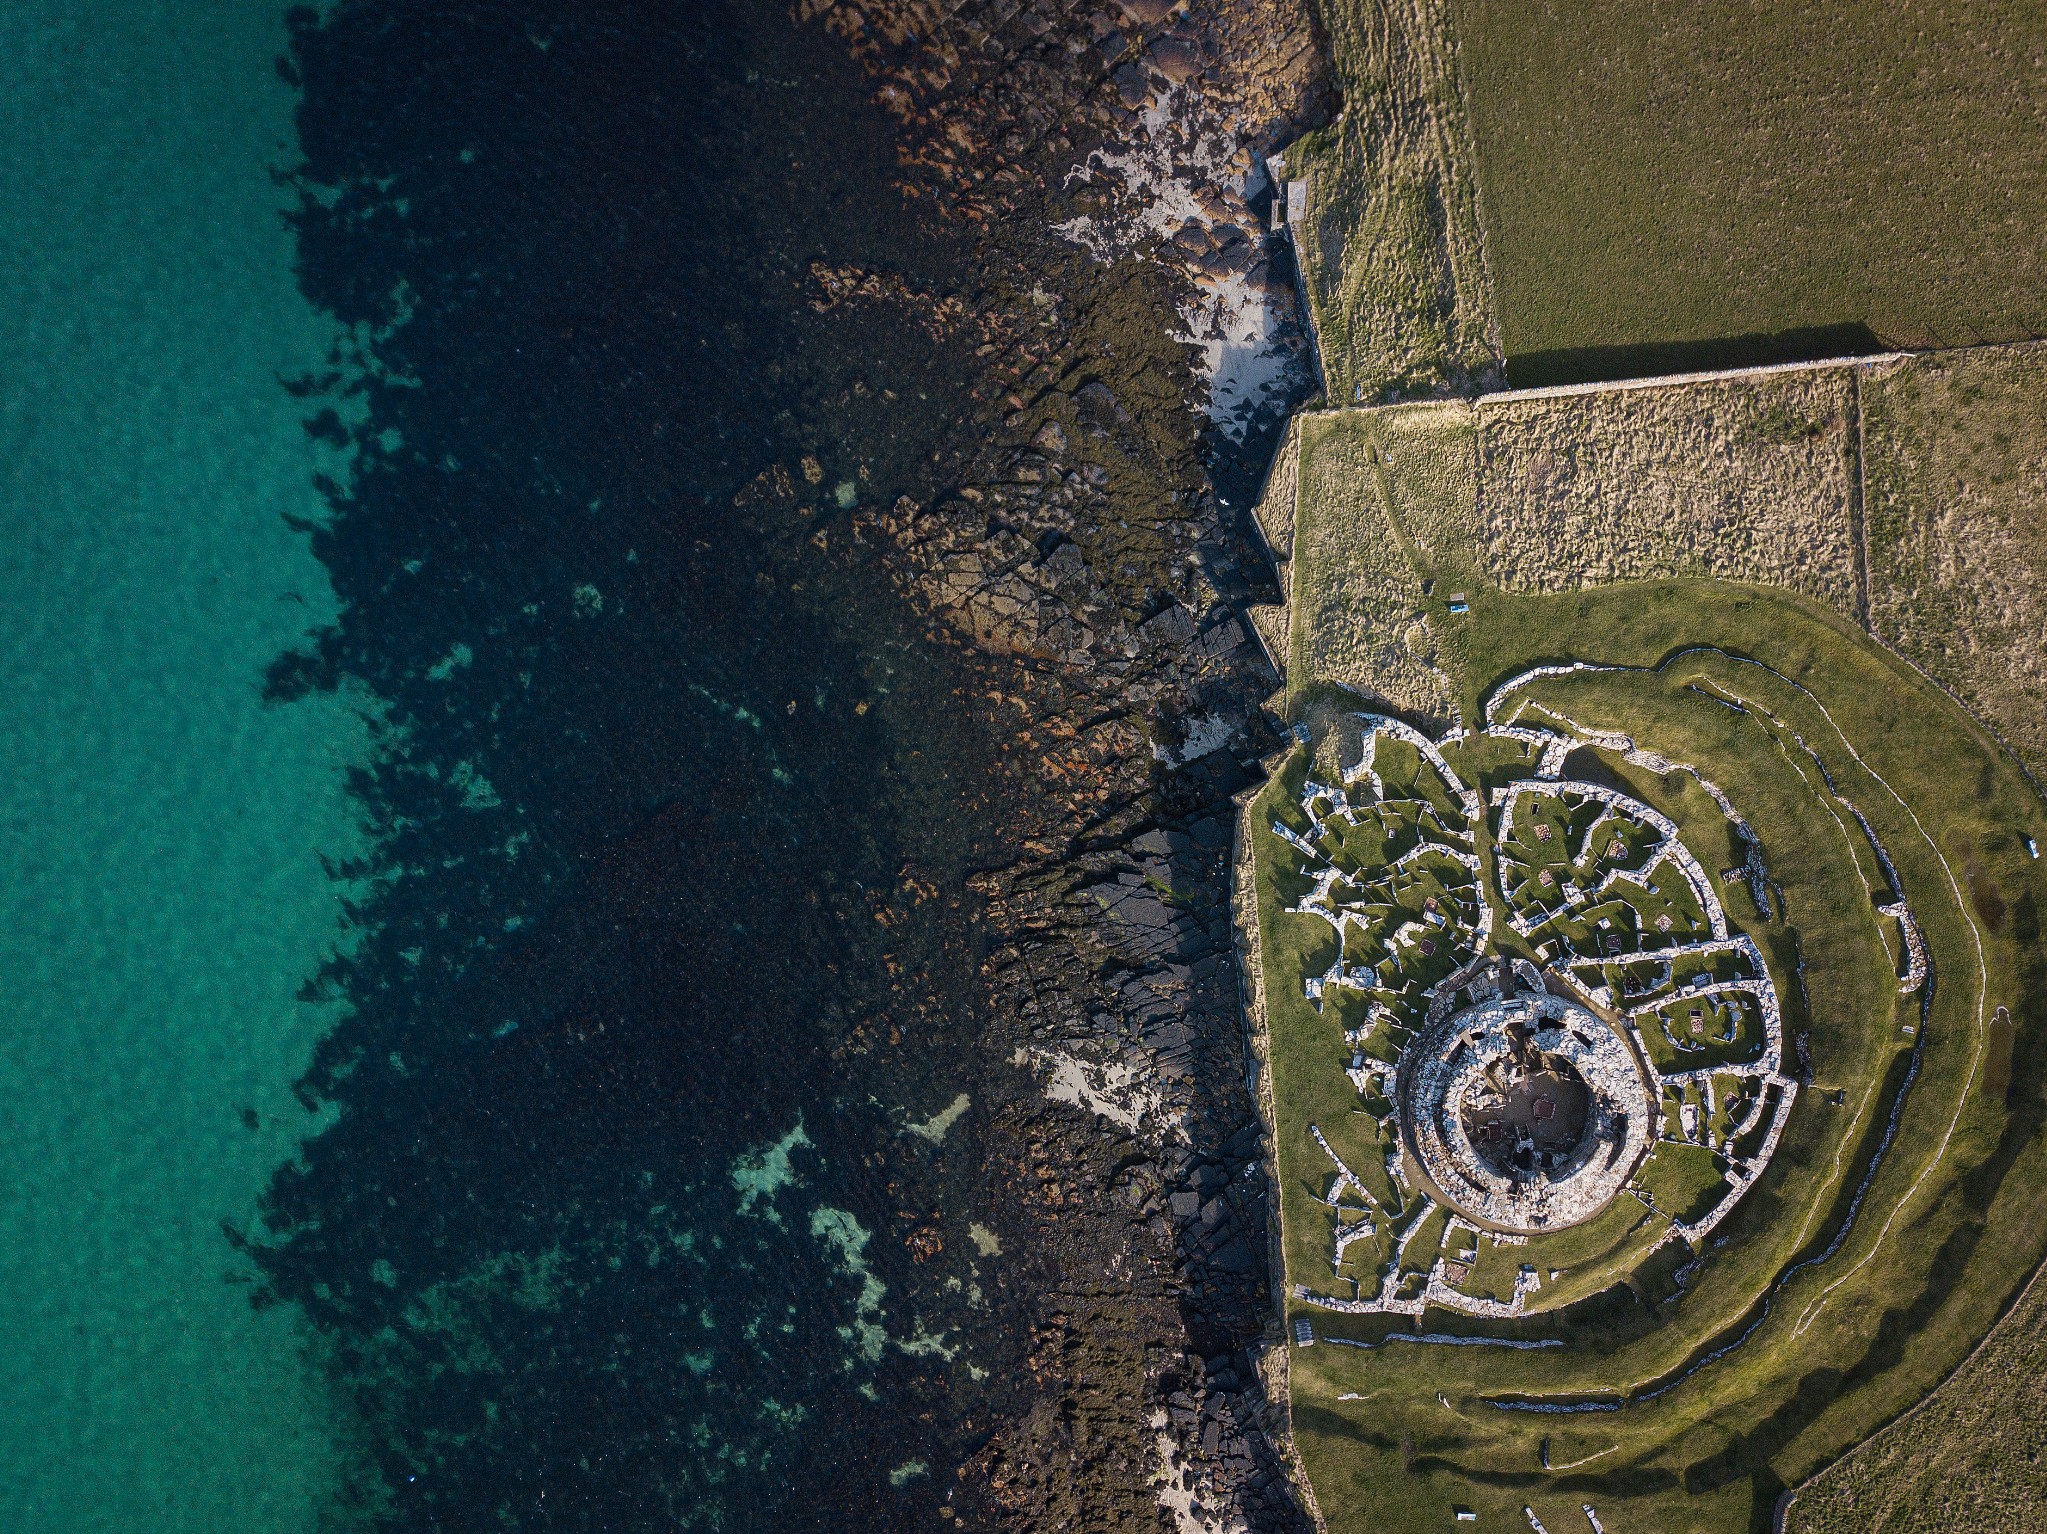 Aerial view over the Broch of Gurness, Orkney - image by John Stoddard